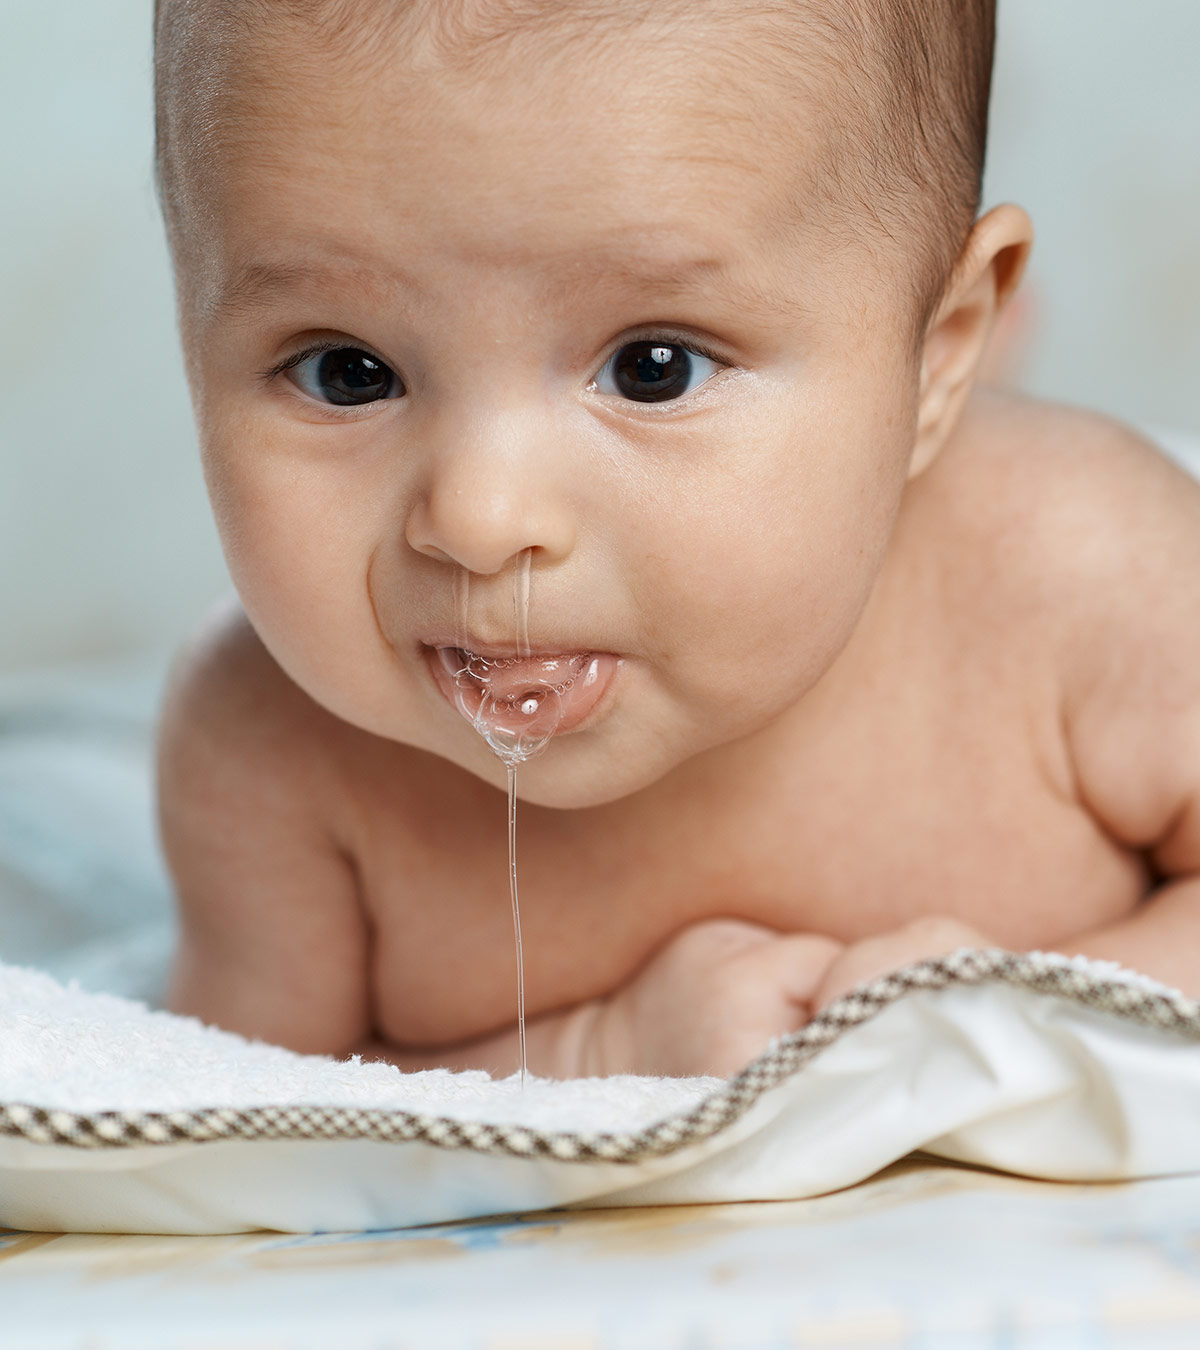 Why Do Babies Spit Up Through Nose And Is This Normal?